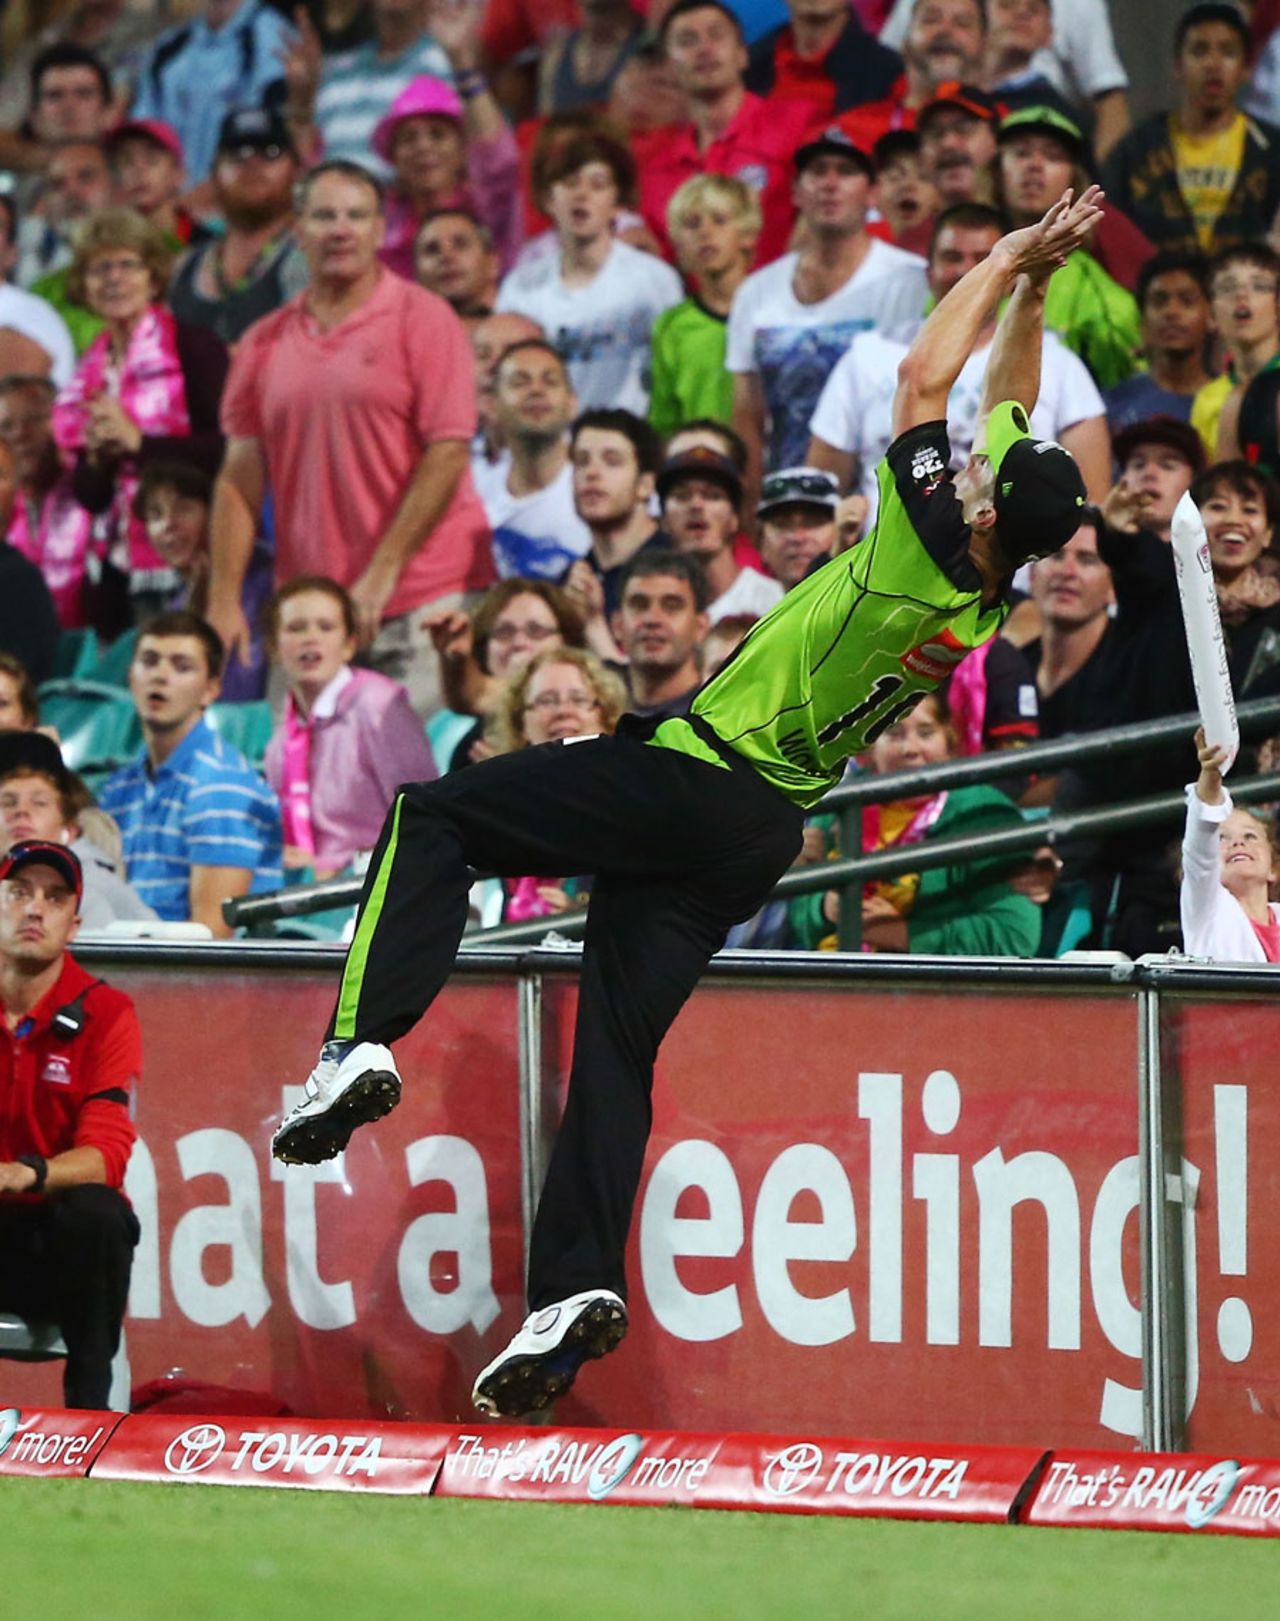 Chris Woakes falls over the boundary attempting a catch, Sydney Sixers v Sydney Thunder, Big Bash League, Sydney, December 21, 2013